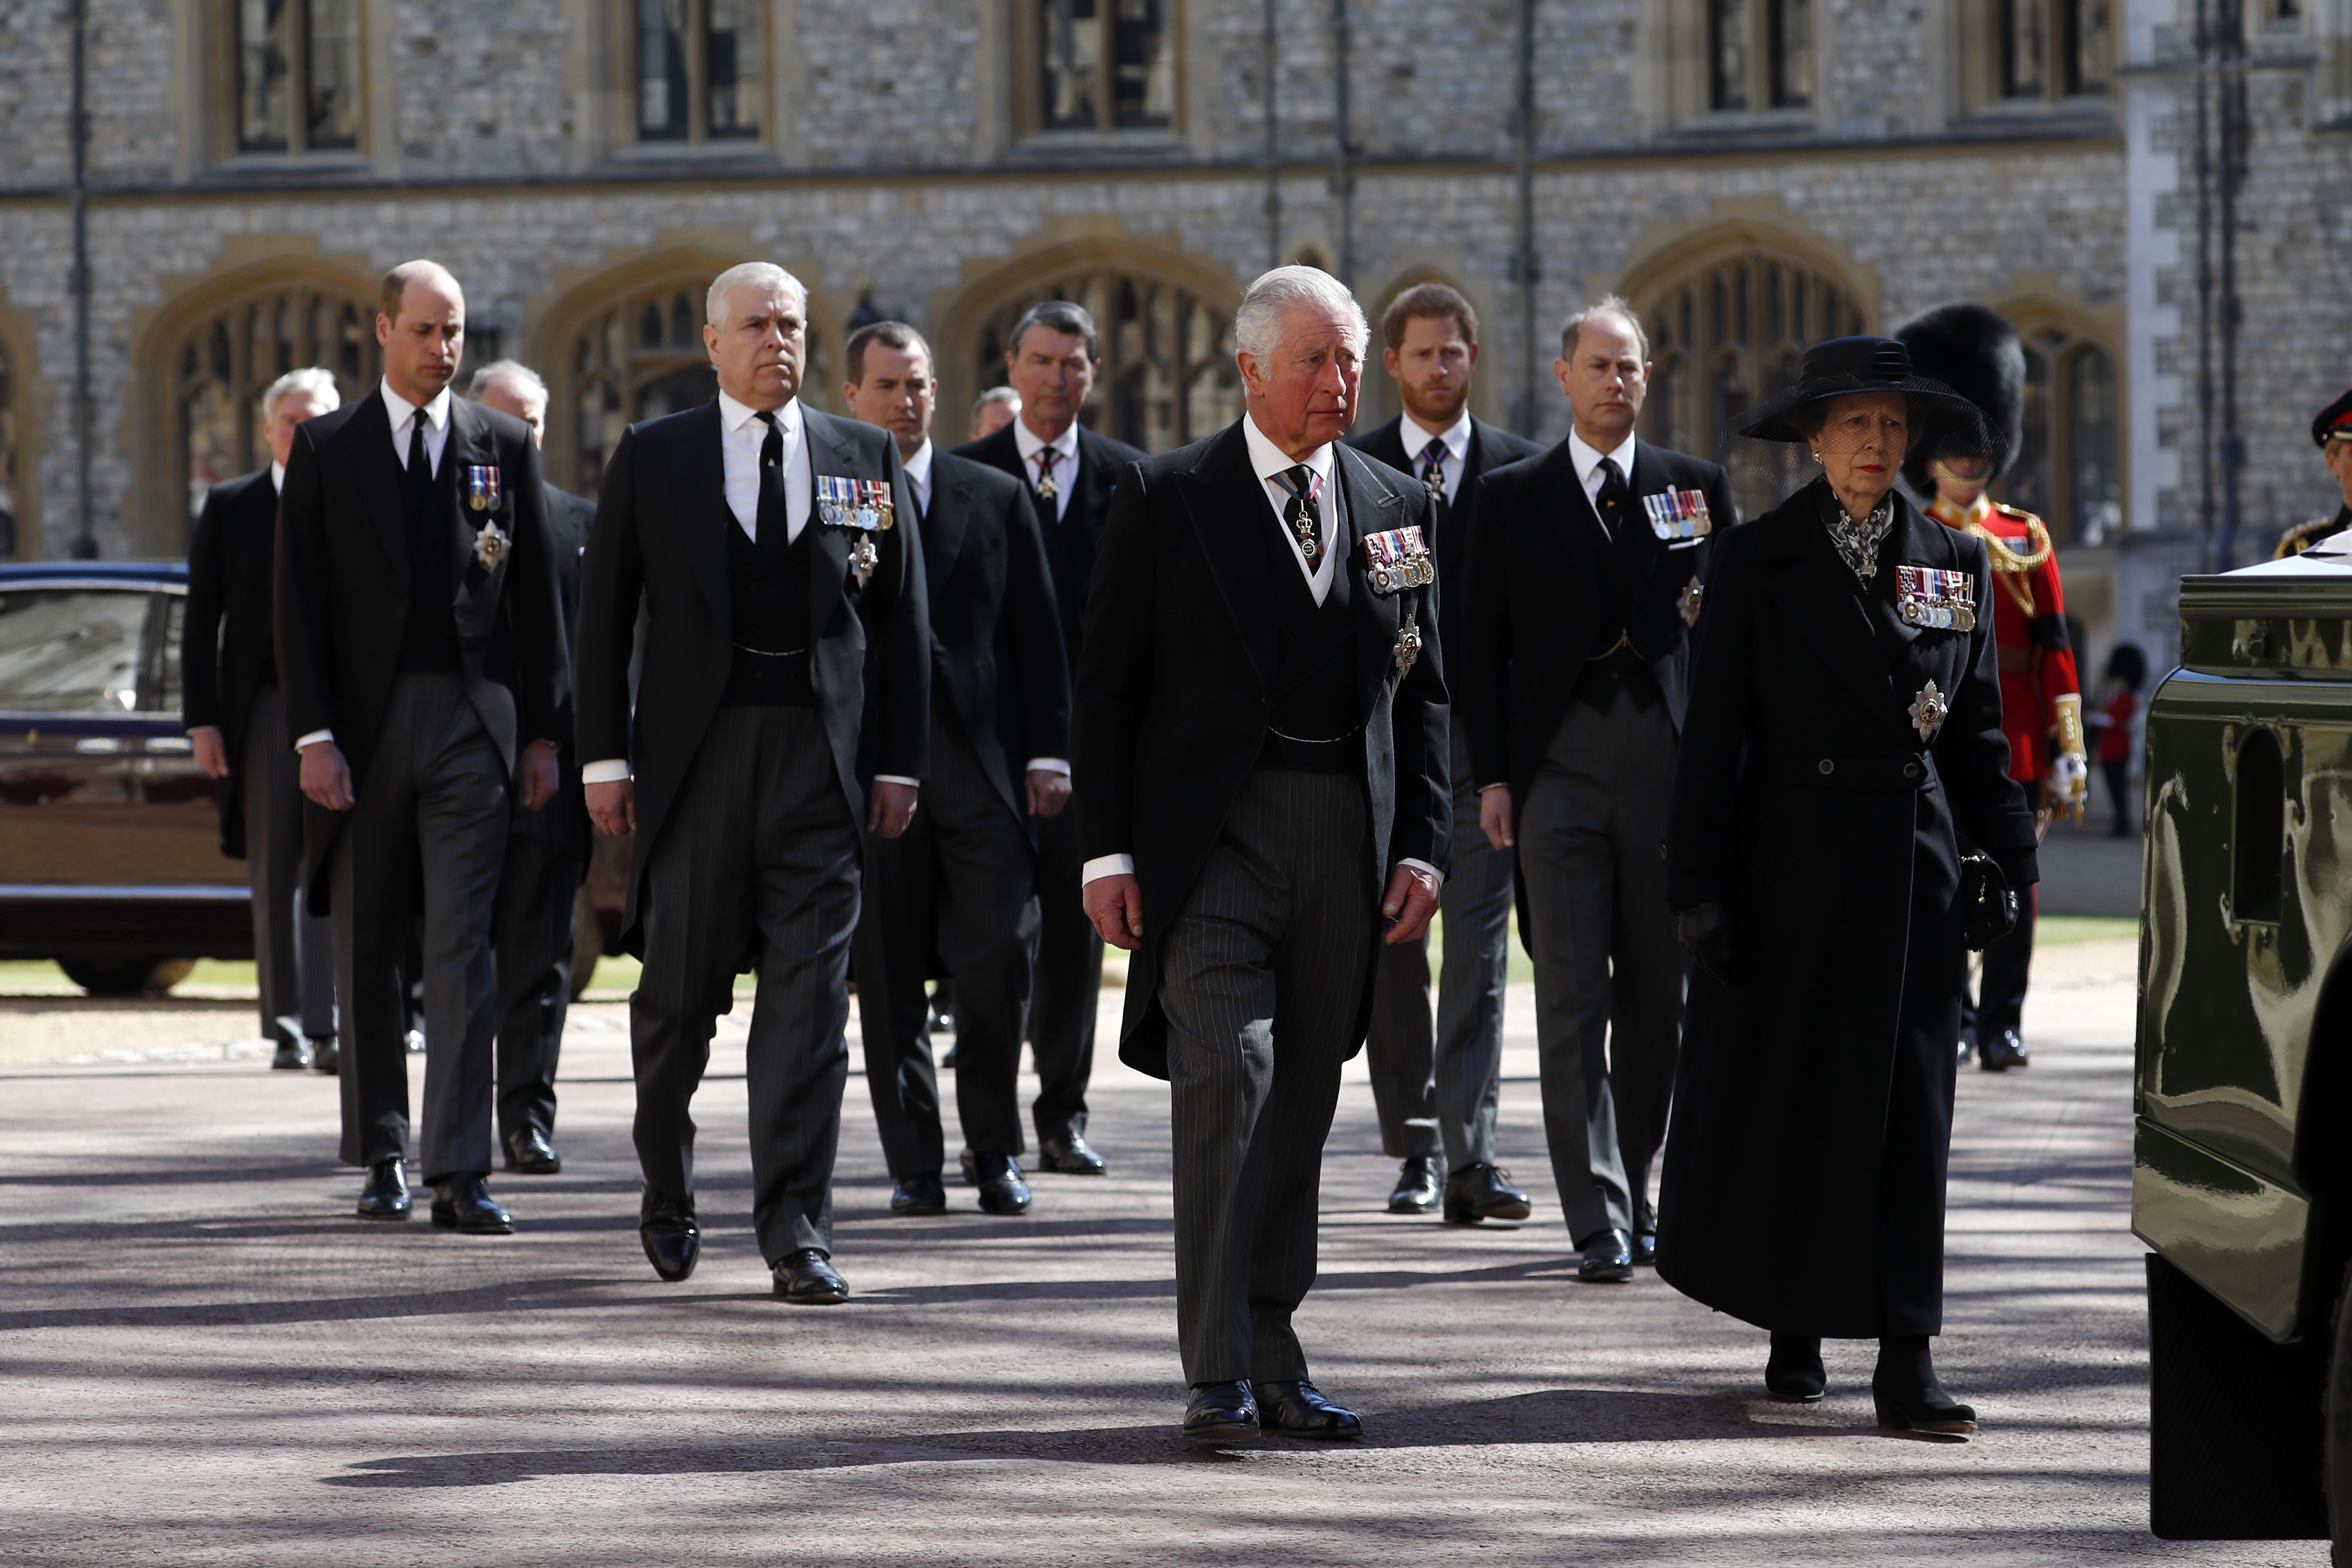 Princess Anne, Princess Royal, Prince Charles, Prince of Wales, Prince Andrew, Duke of York, Prince Edward, Earl of Wessex, Prince William, Duke of Cambridge, Peter Phillips, Prince Harry, Duke of Sussex, Earl of Snowdon David Armstrong-Jones and Vice-Admiral Sir Timothy Laurence follow Prince Philip's coffin.